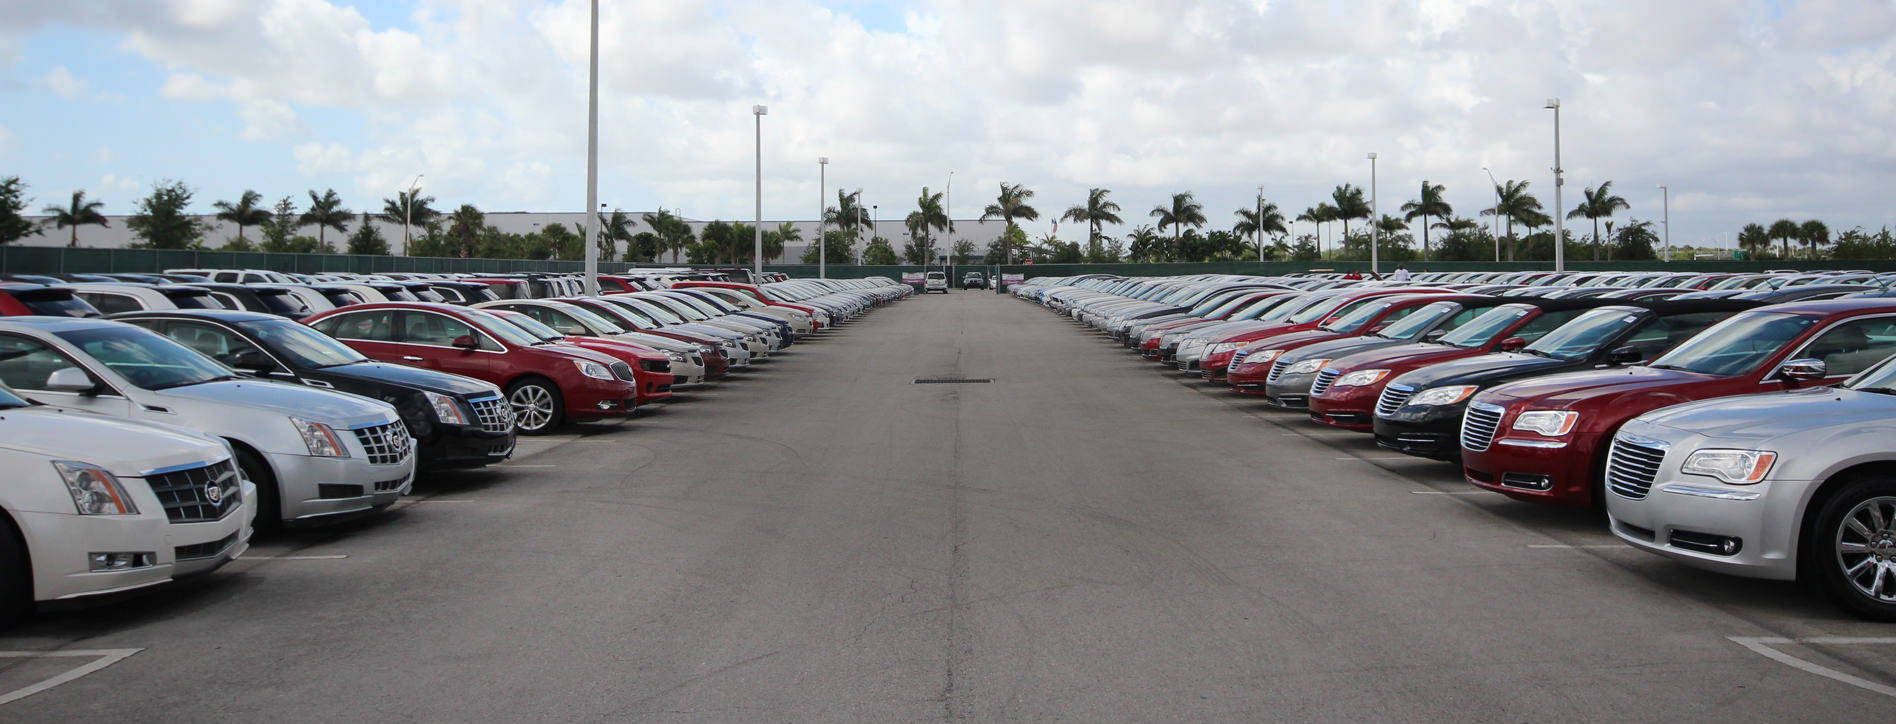 A parking lot filled with various types and brands of cars.